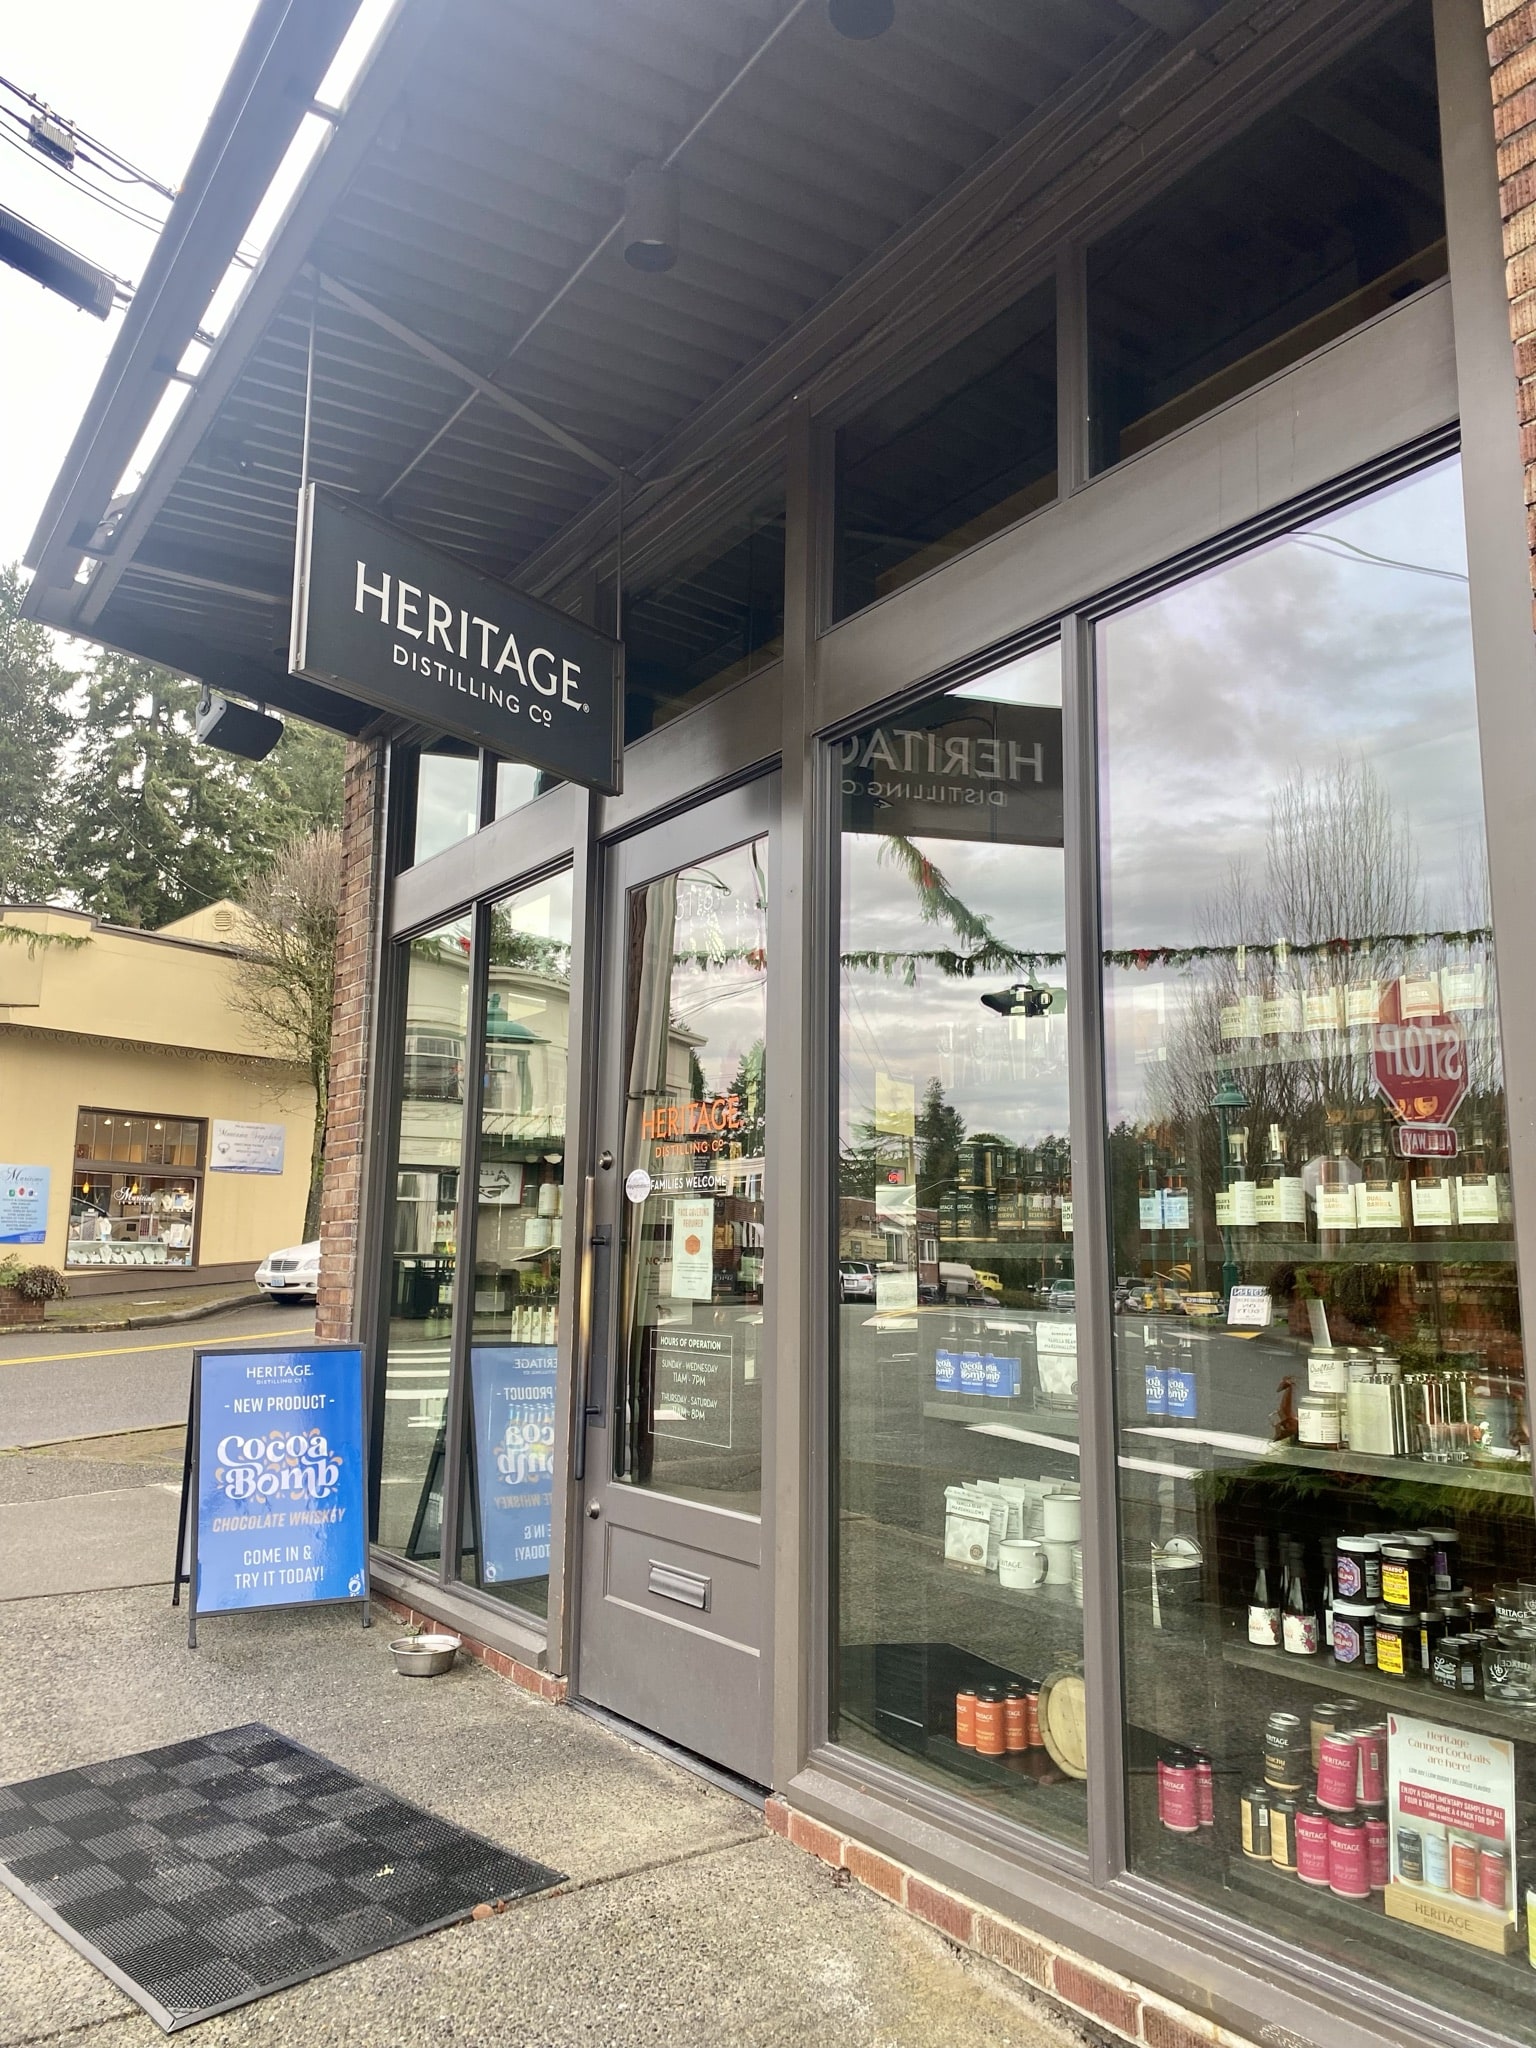 Heritage Distilling Co.’s taproom in Gig Harbor on Jan. 12, 2022. The company has aggressive mitigation policies to prevent the spread of COVID-19, which has helped it weather the omicron surge in cases, according to CEO and co-founder Justin Stiefel.